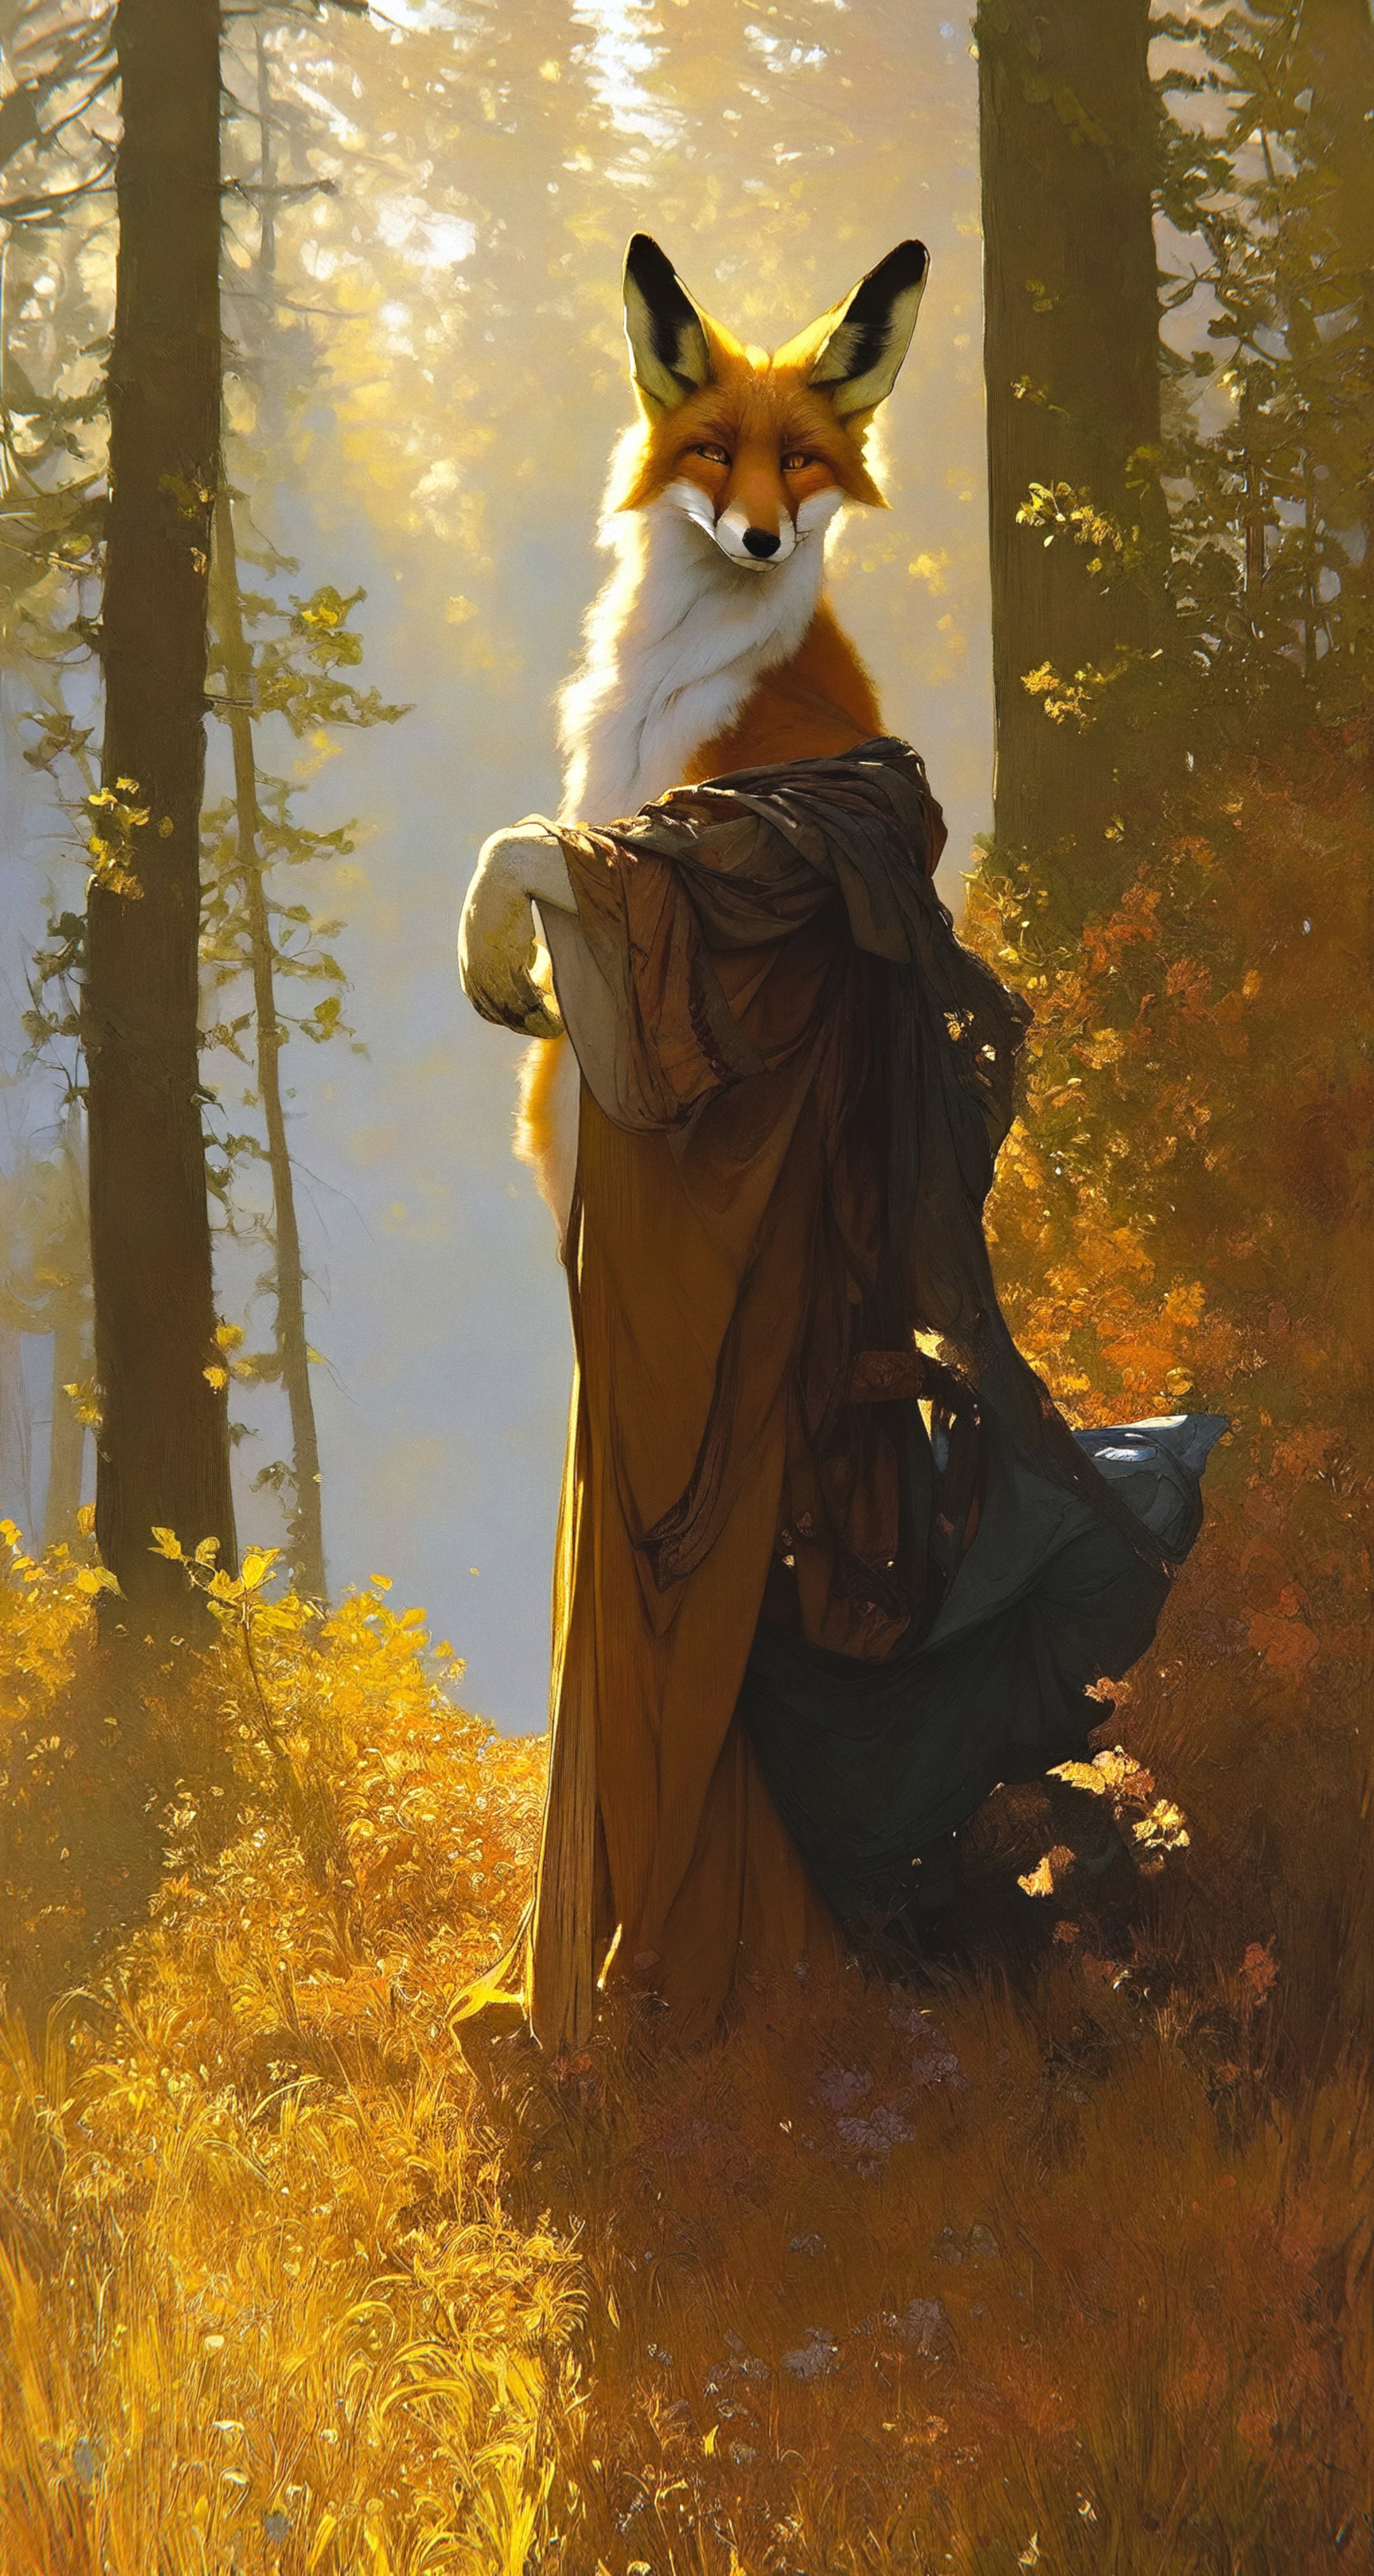 General 2160x4050 AI art Stable Diffusion fox anthropomorphism painting golden hour fur warm colors forest standing portrait display animals